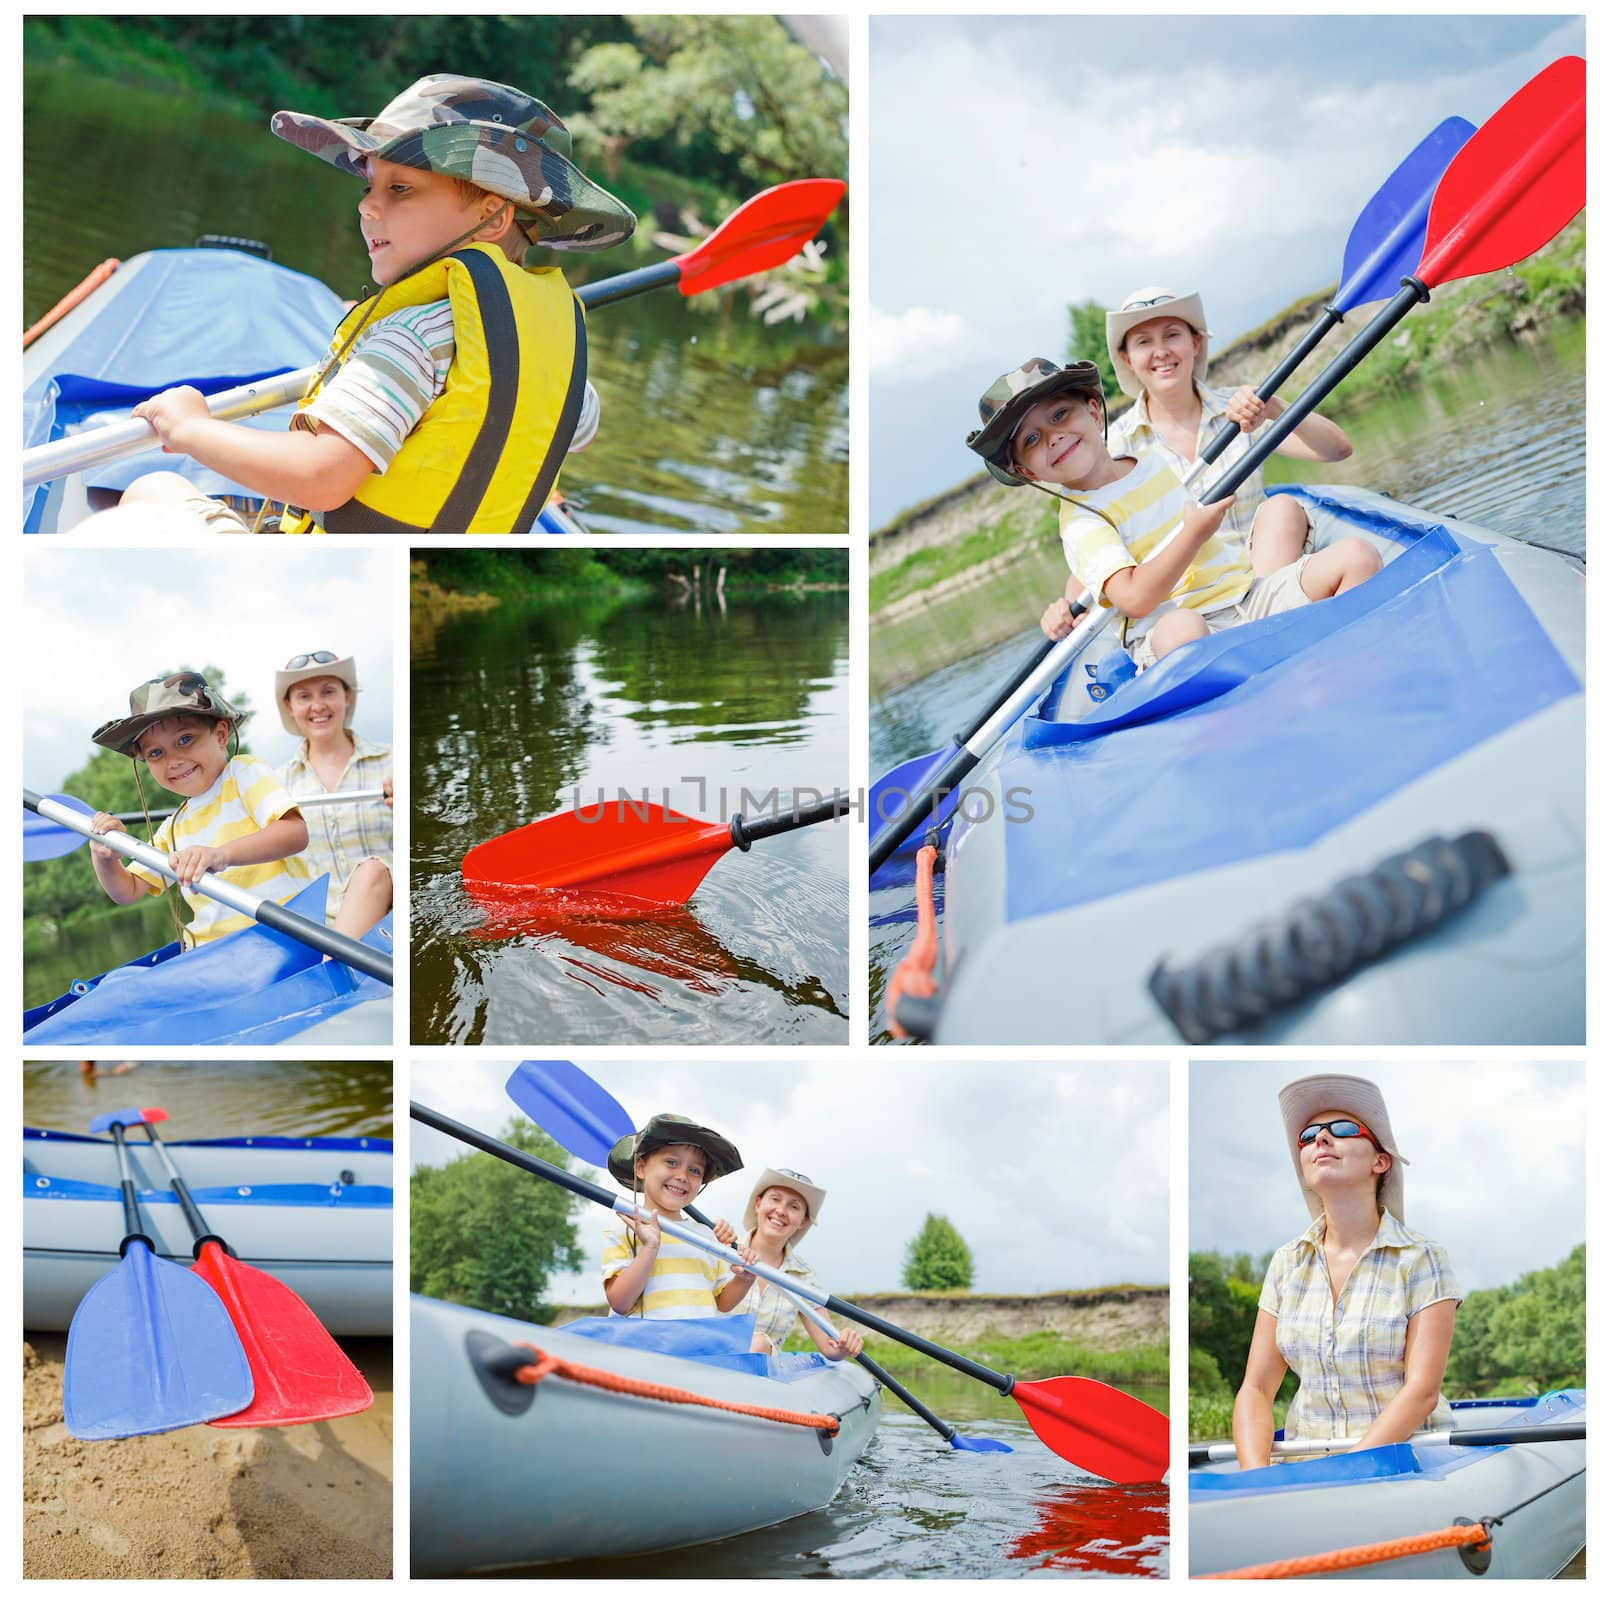 Collage of images happy young boy with mother paddling a kayak on the river, enjoying a lovely summer day